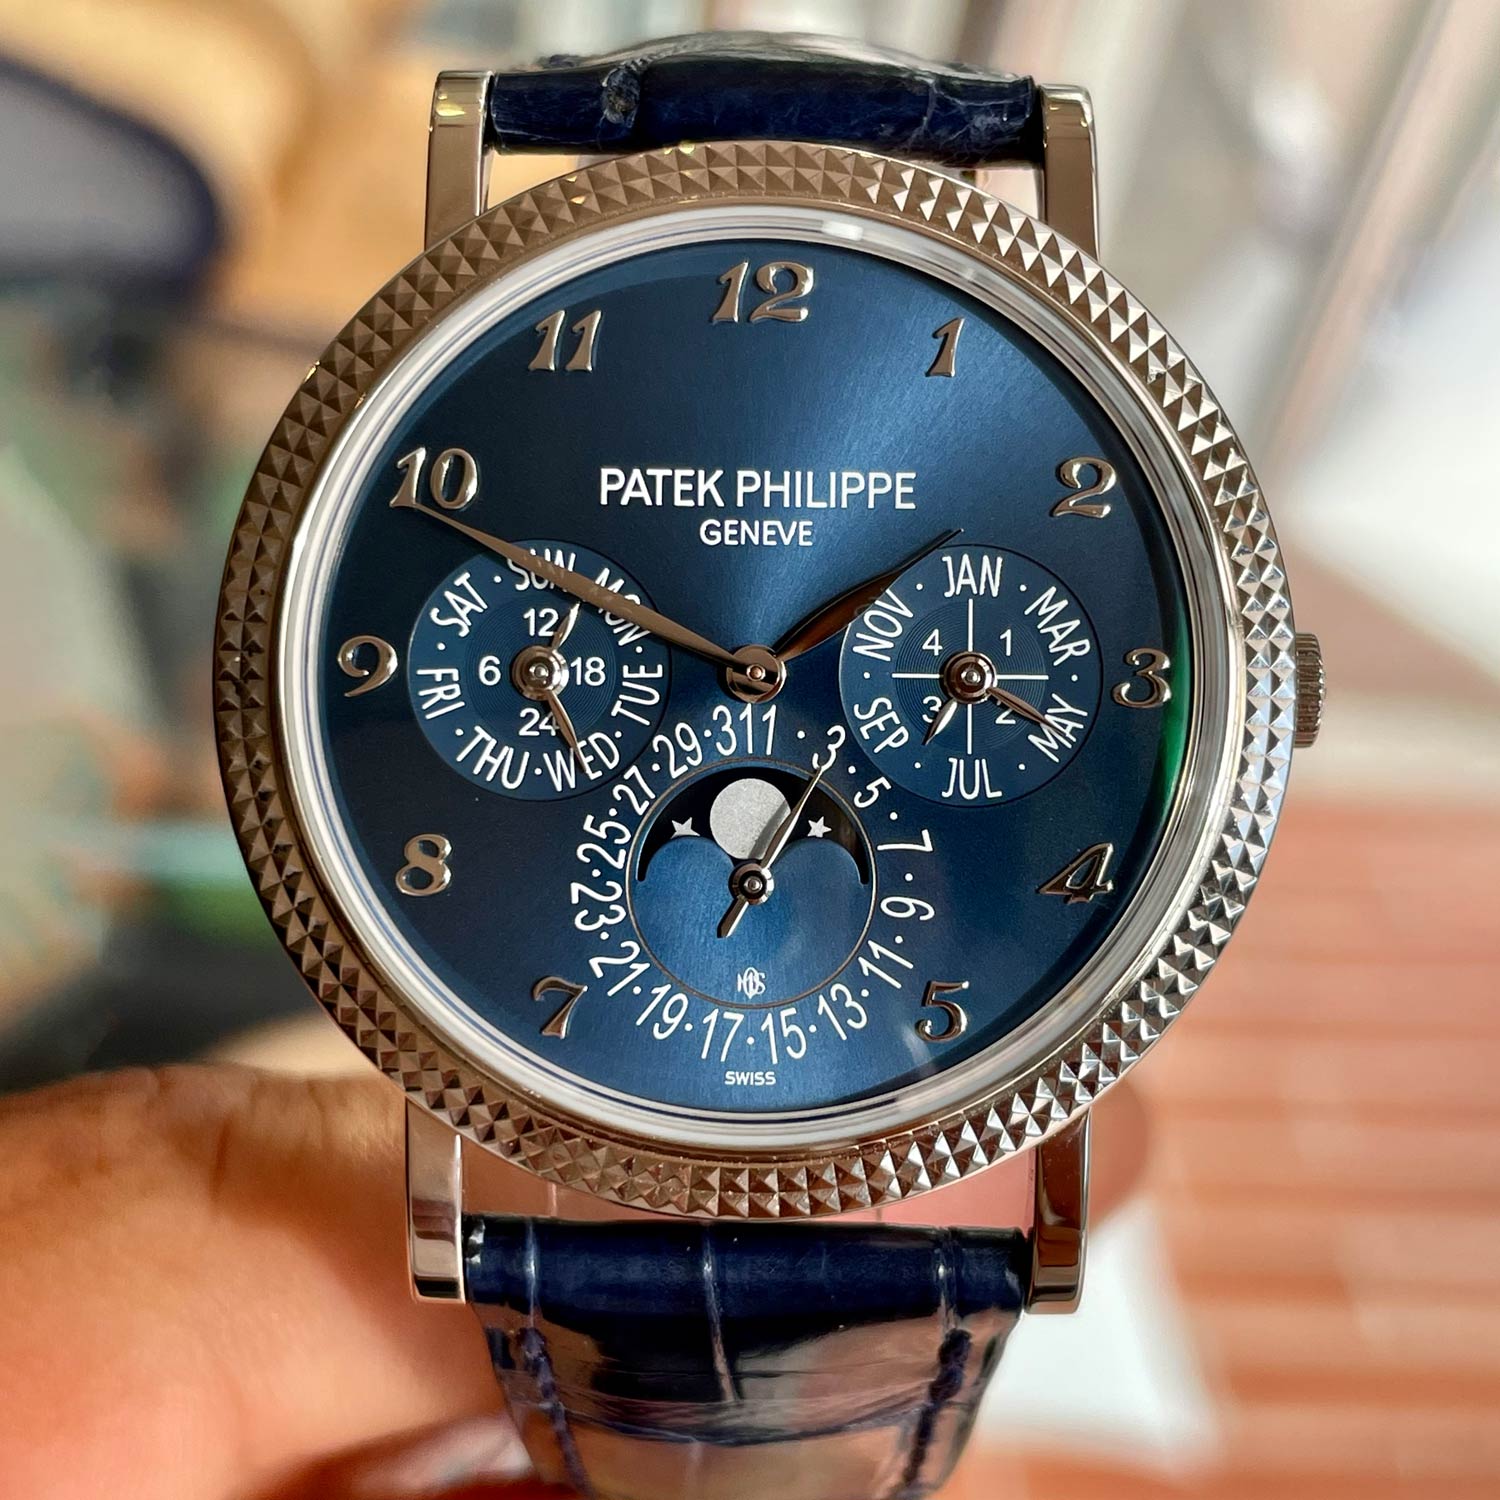 Lot 123 Patek Philippe: Extraordinary and Unique Perpetual Calendar Wristwatch in White Gold, Reference 5139g, Moon Phases, Original Certificate. Special Order for Michael Ovitz.